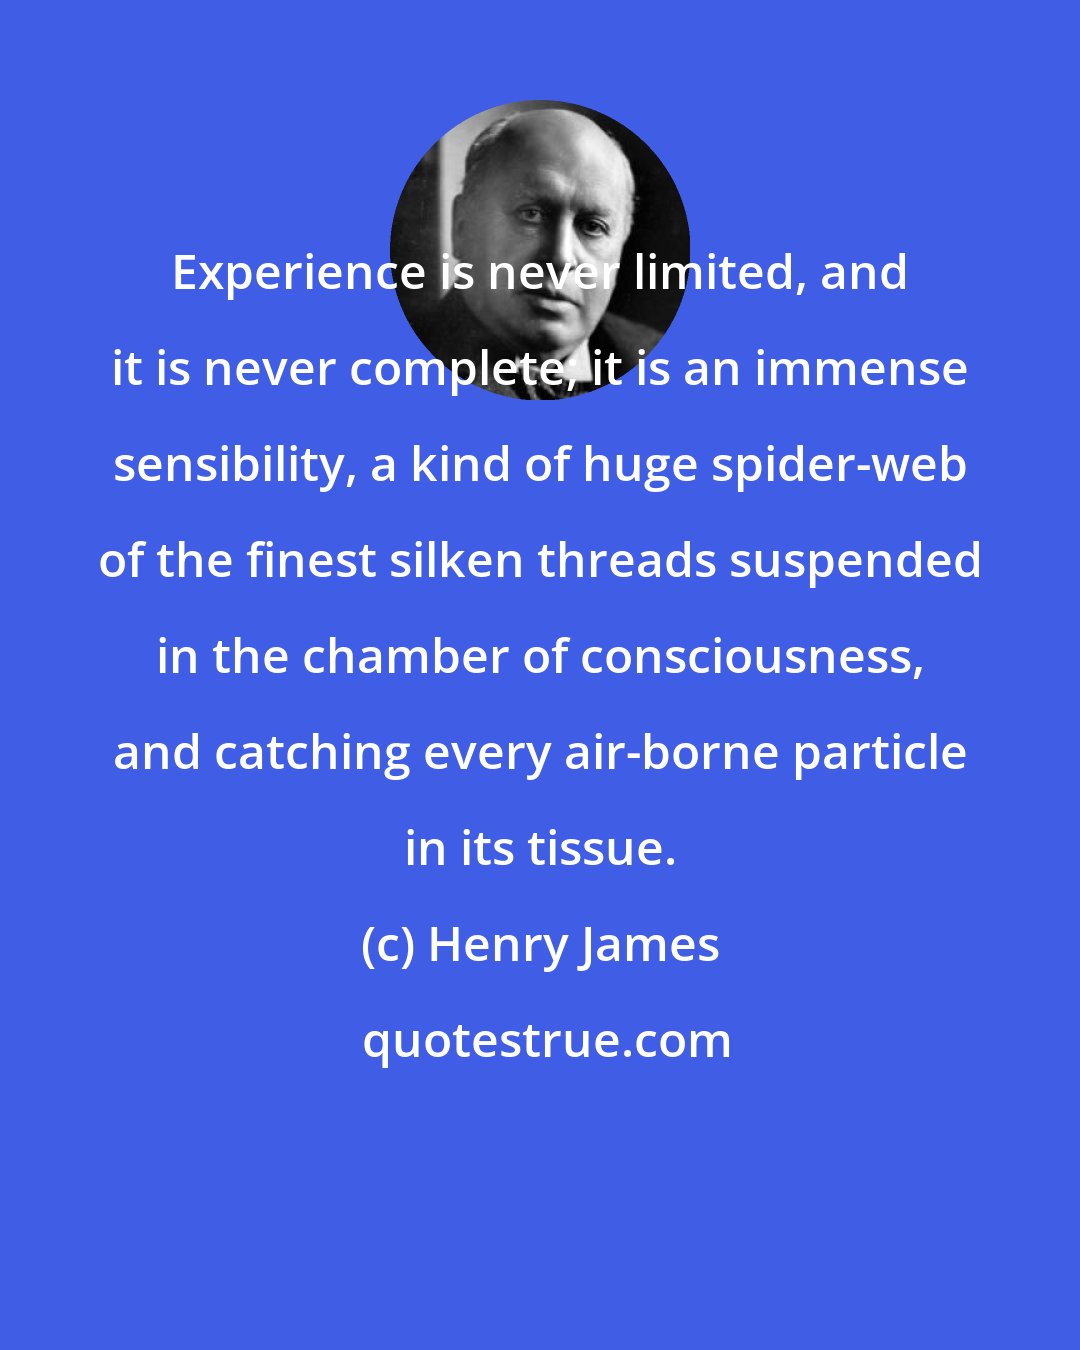 Henry James: Experience is never limited, and it is never complete; it is an immense sensibility, a kind of huge spider-web of the finest silken threads suspended in the chamber of consciousness, and catching every air-borne particle in its tissue.